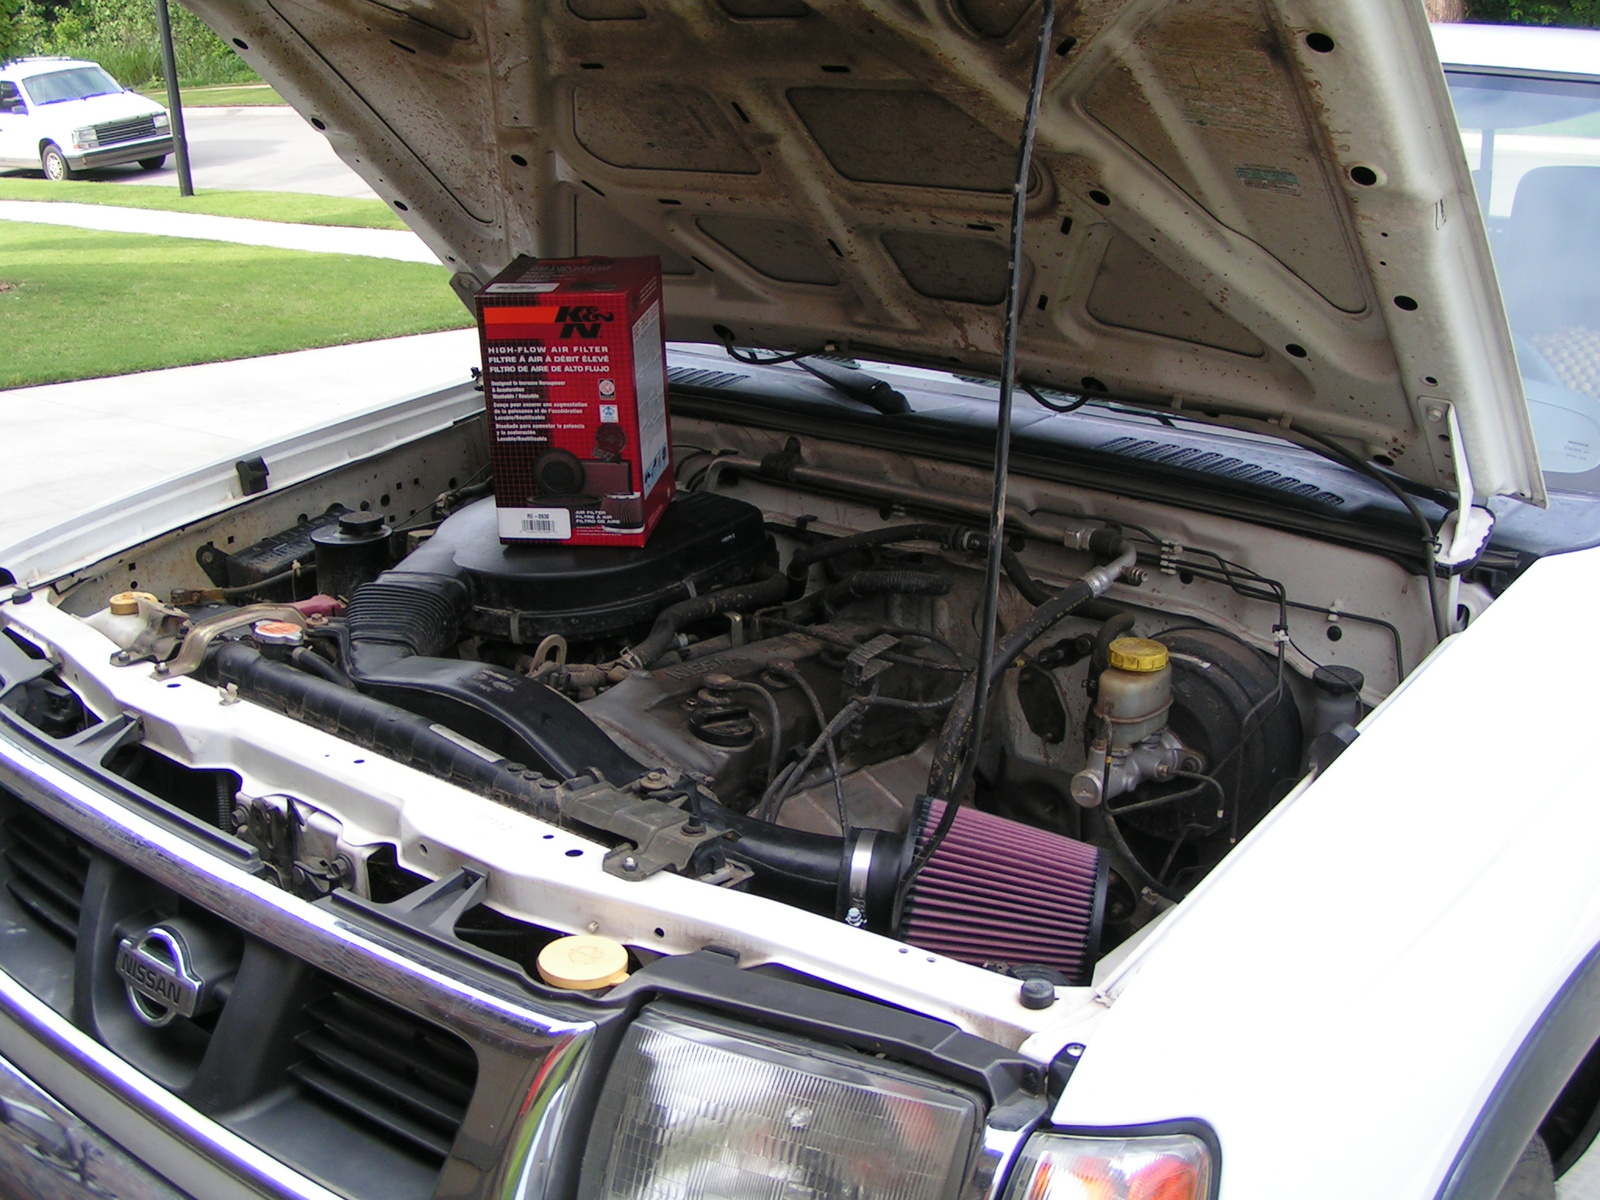 Used 1998 nissan frontier engine #1